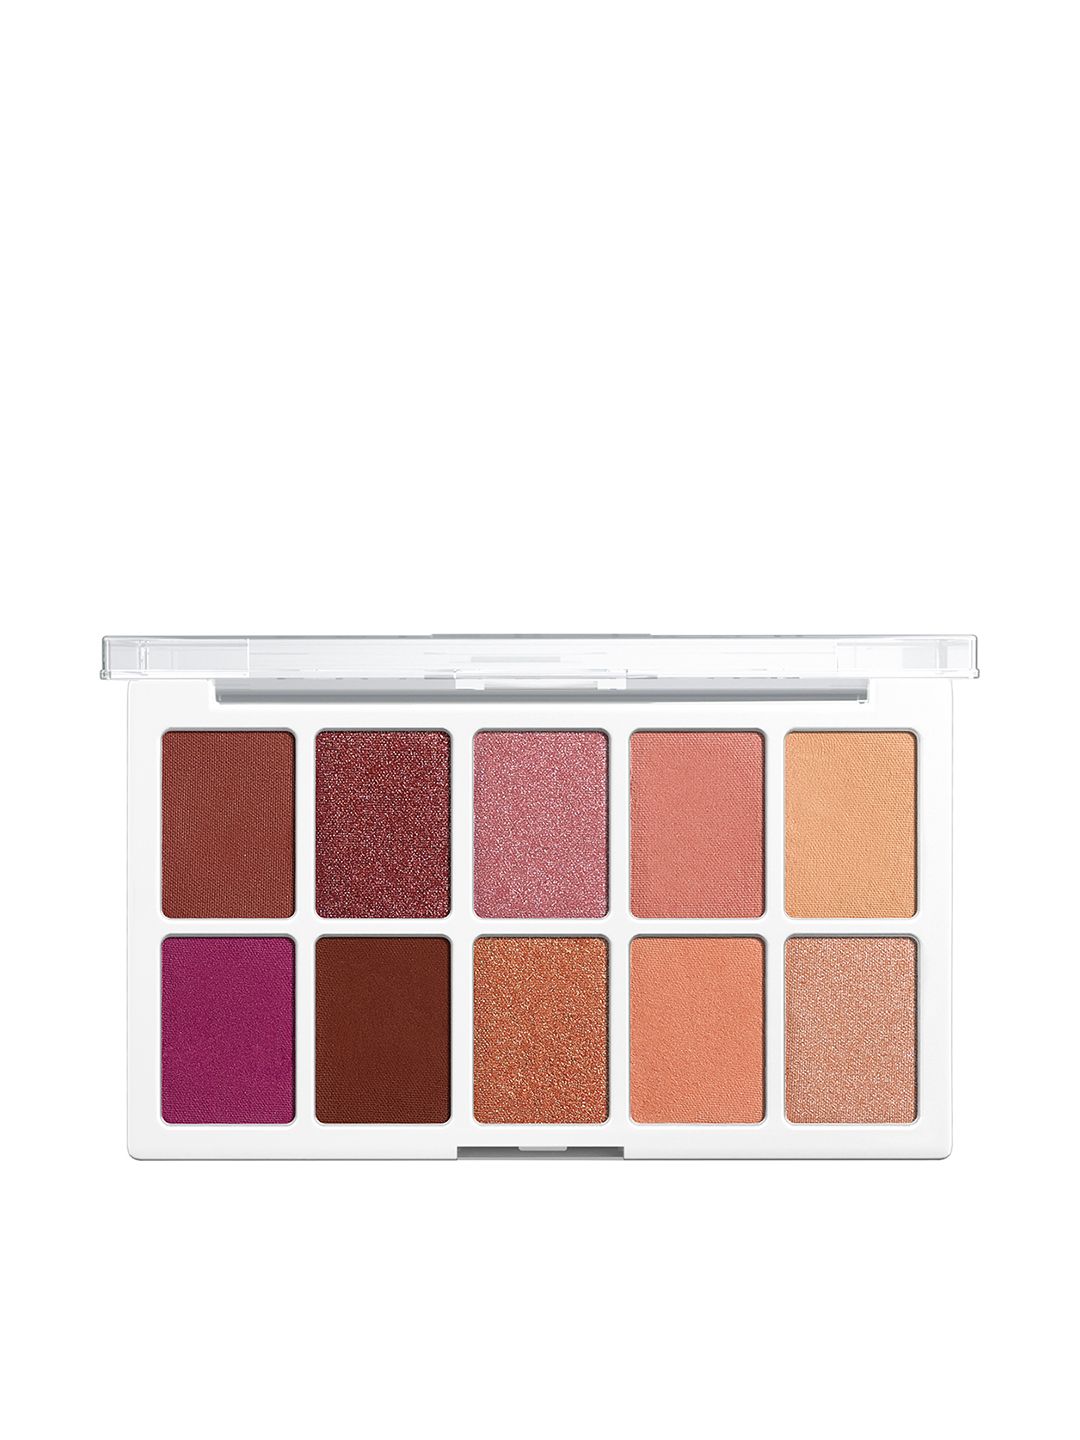 Wet n Wild Color Icon 10 Pan Shadow Palette- Heart & Sol 111407E Price in India